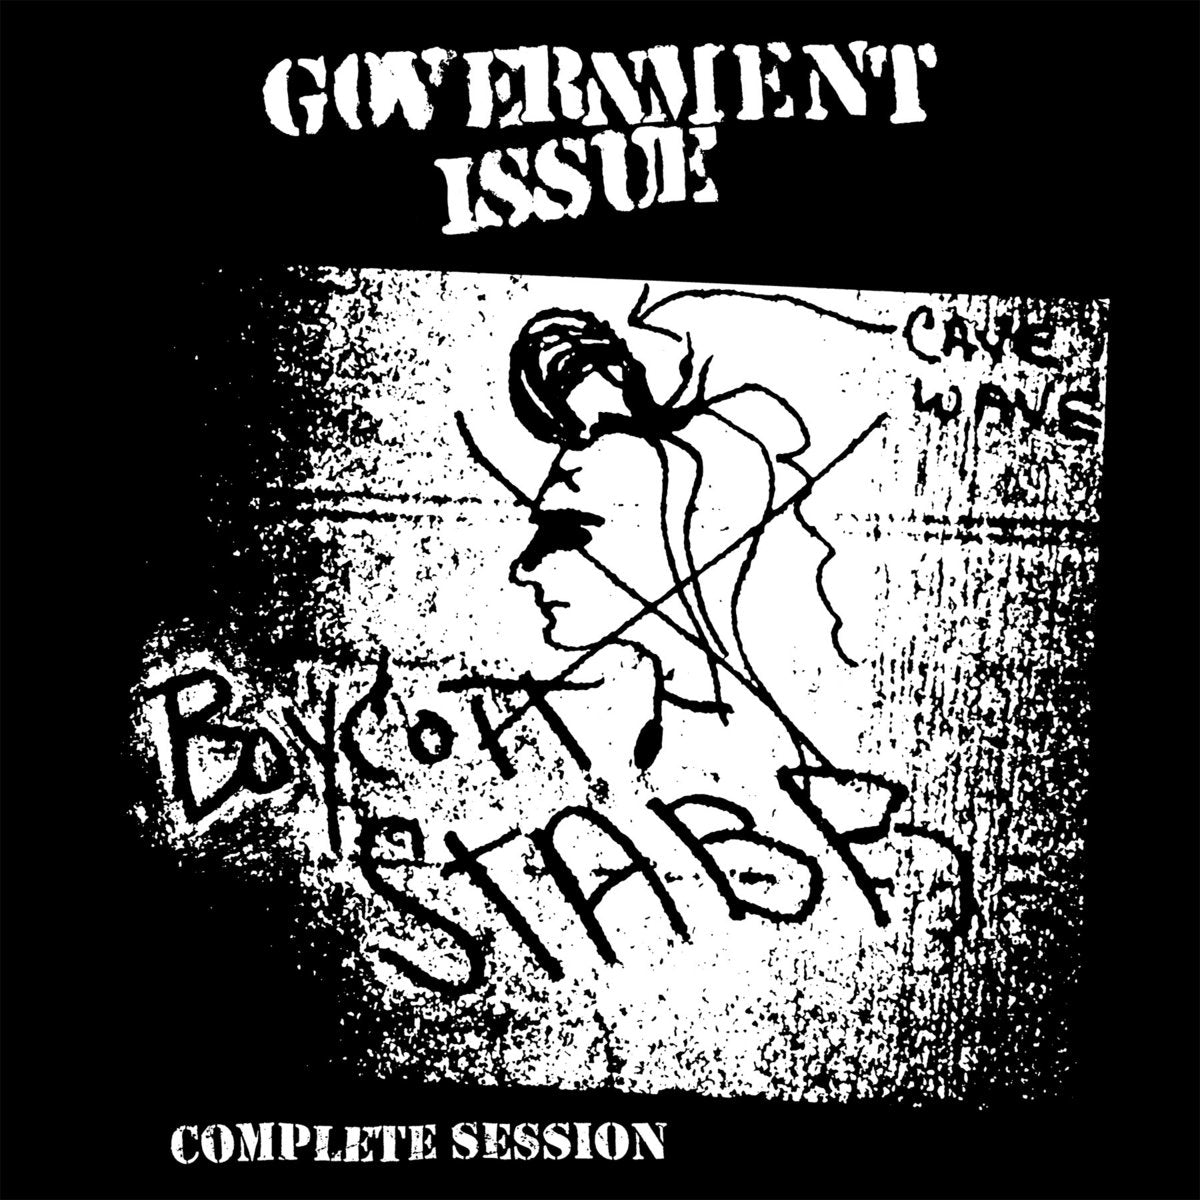 Government Issue - Boycott Stabb (Complete Version)